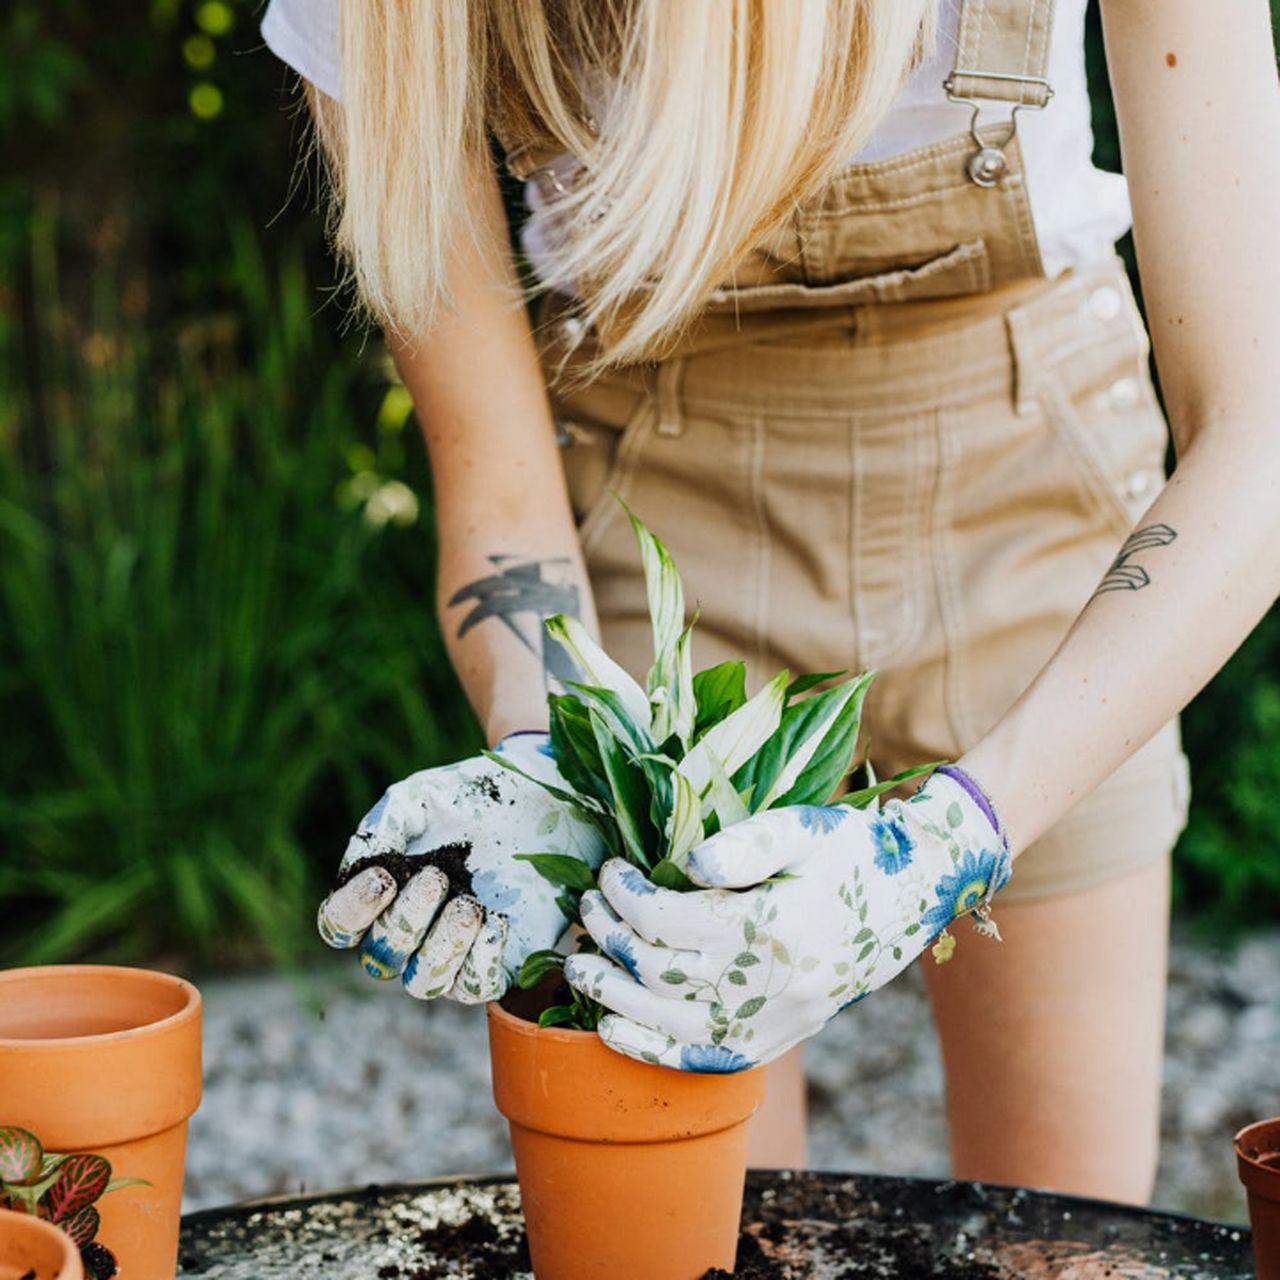 Woman in beige overalls and gardening gloves planting a pot plant